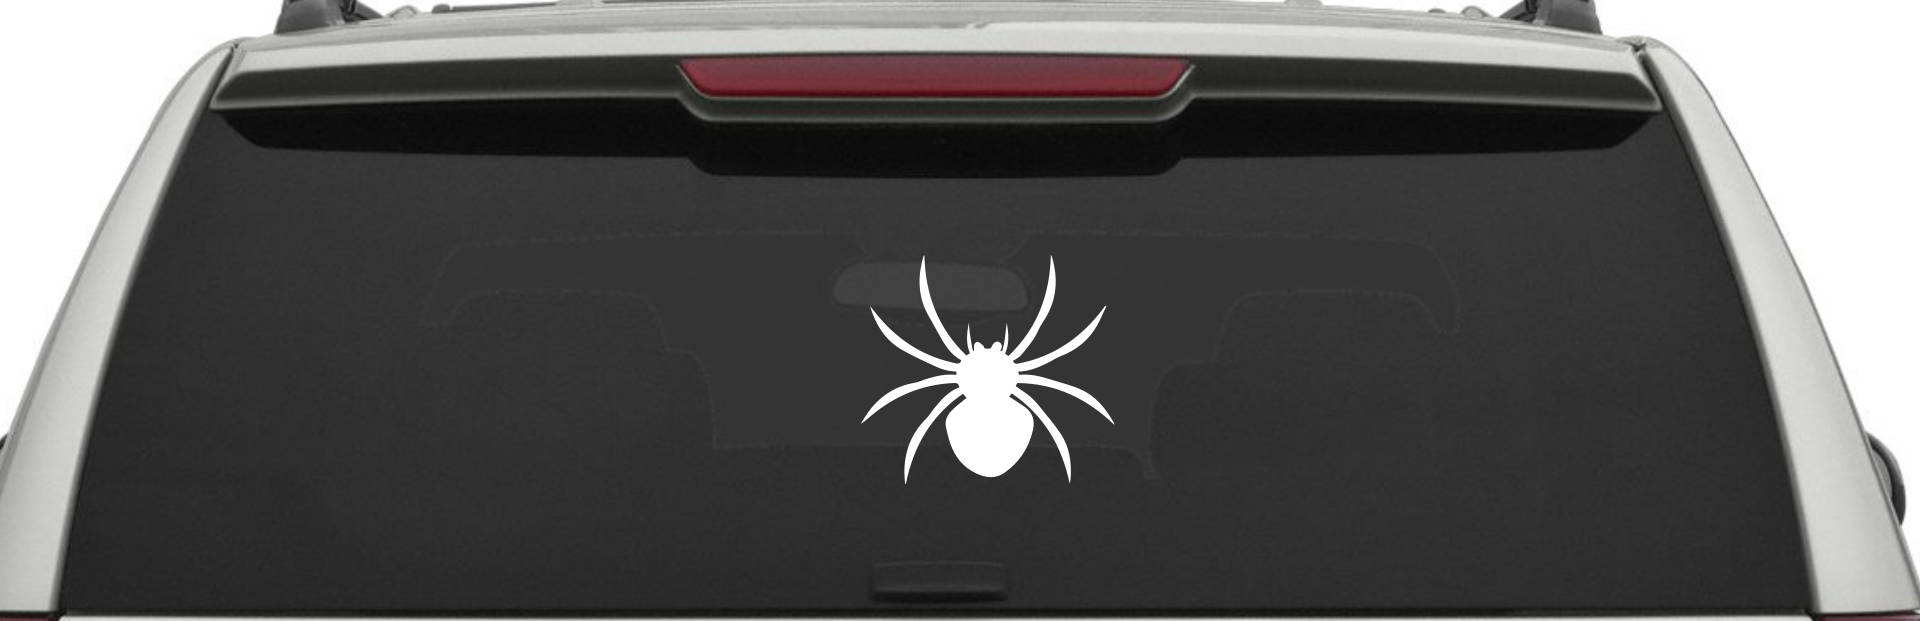 Black spider decal spider sticker by DecalTheory on Etsy | Etsy